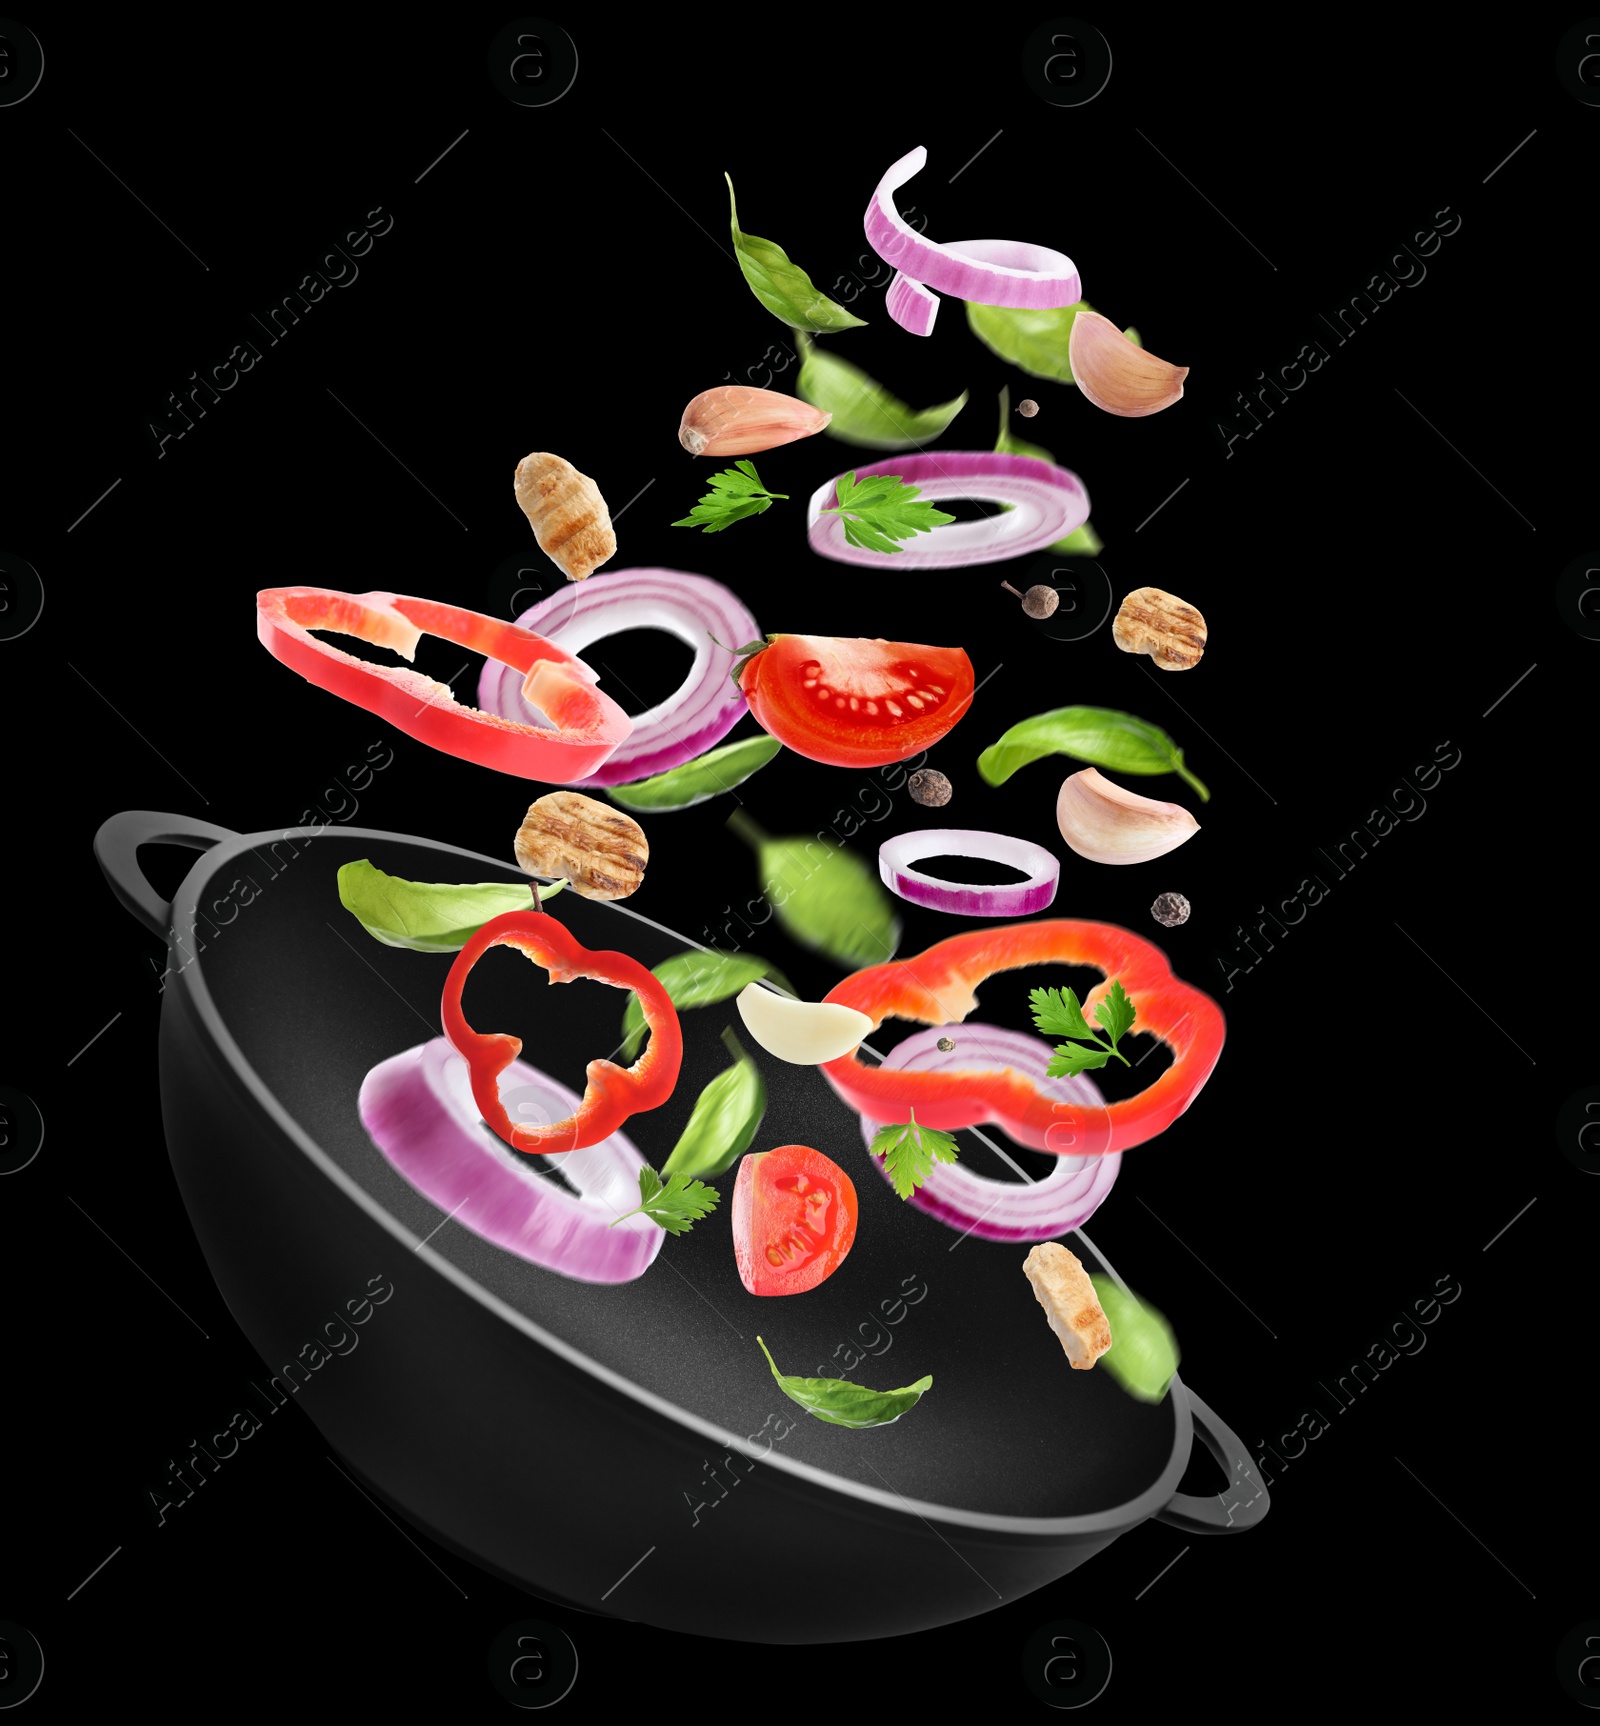 Image of Different tasty ingredients falling into wok on black background